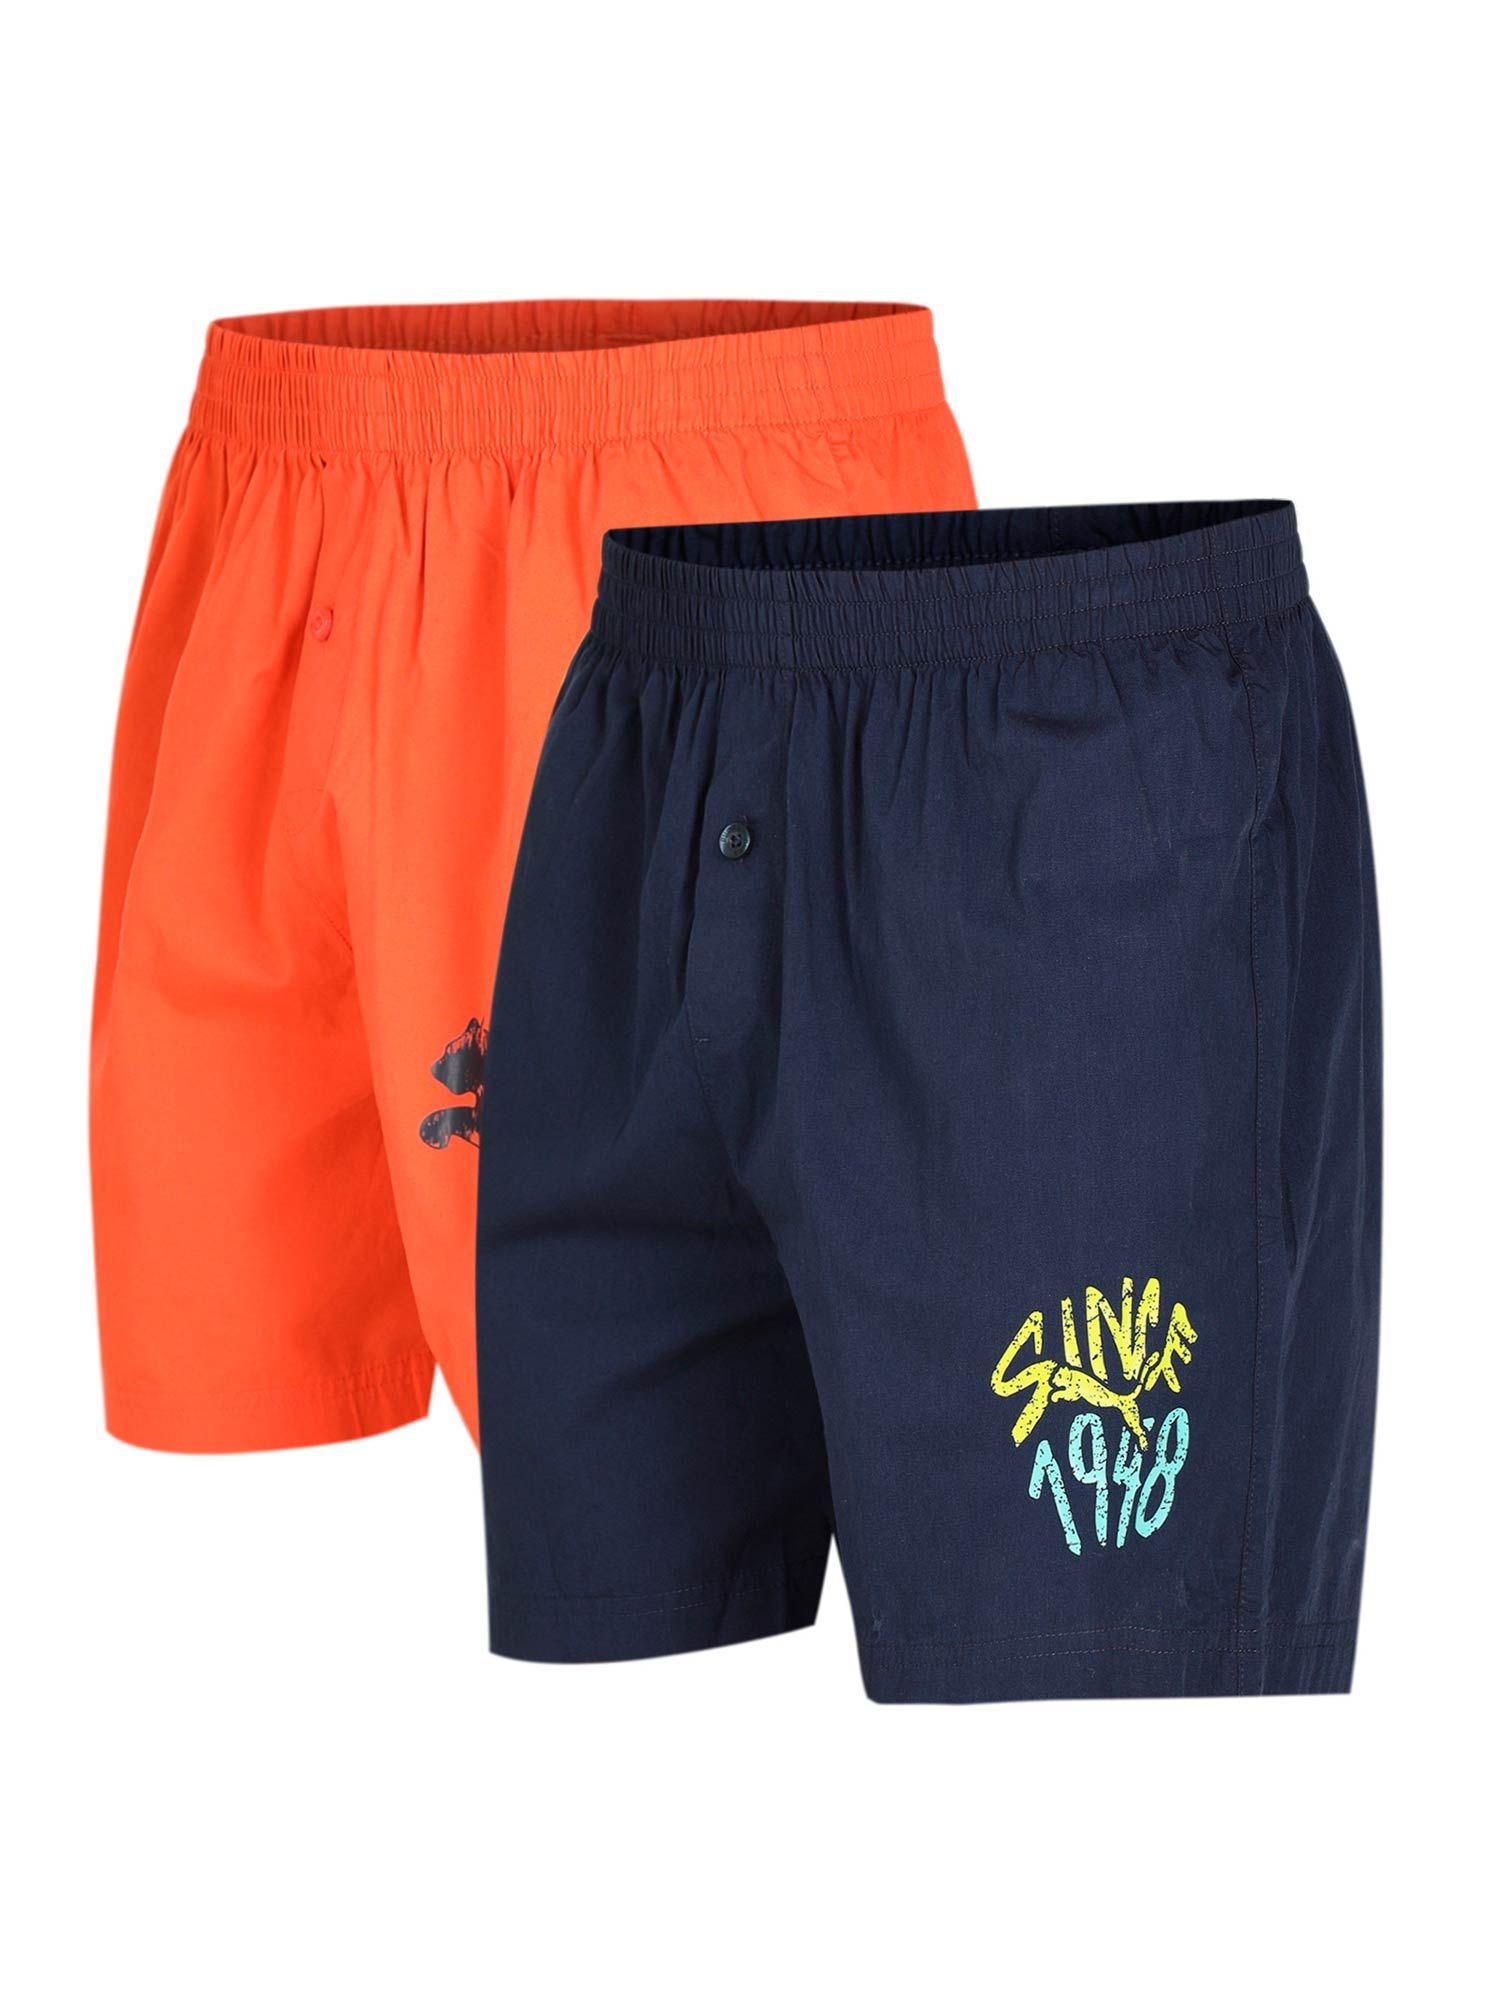 woven mens orange & navy blue boxers (pack of 2)